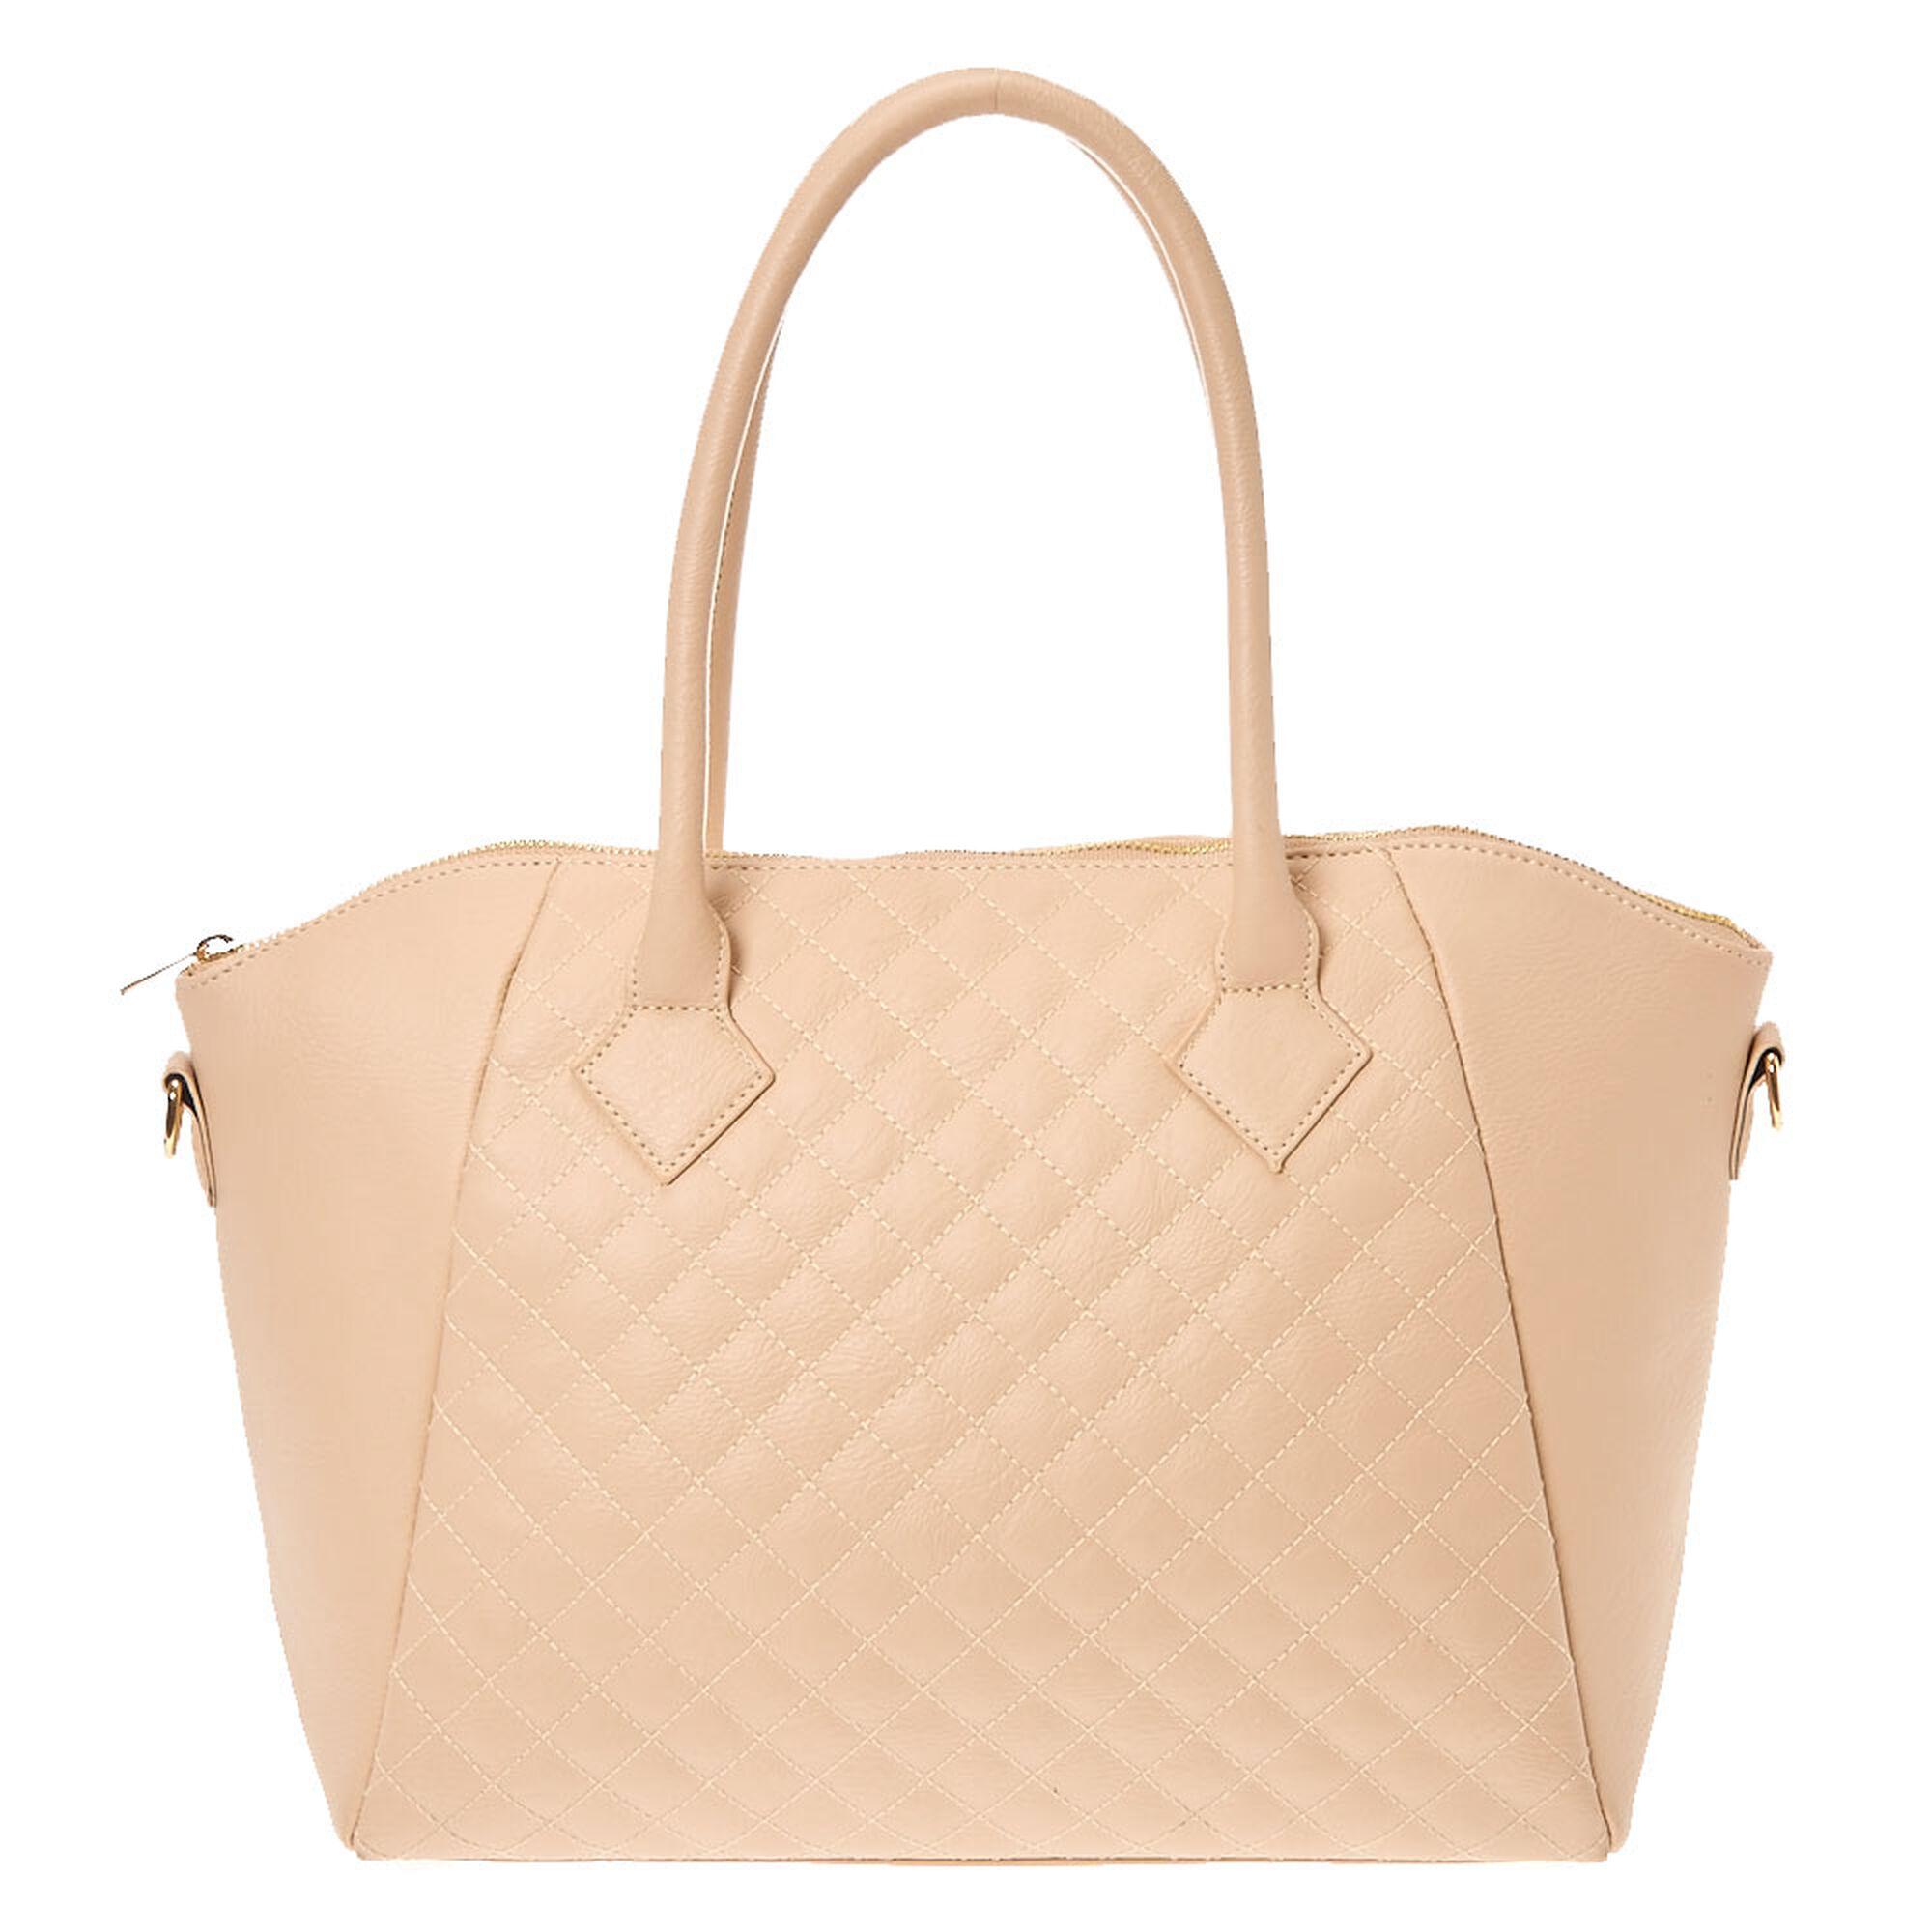 Tan Quilted Faux Leather Tote Bag | Icing US